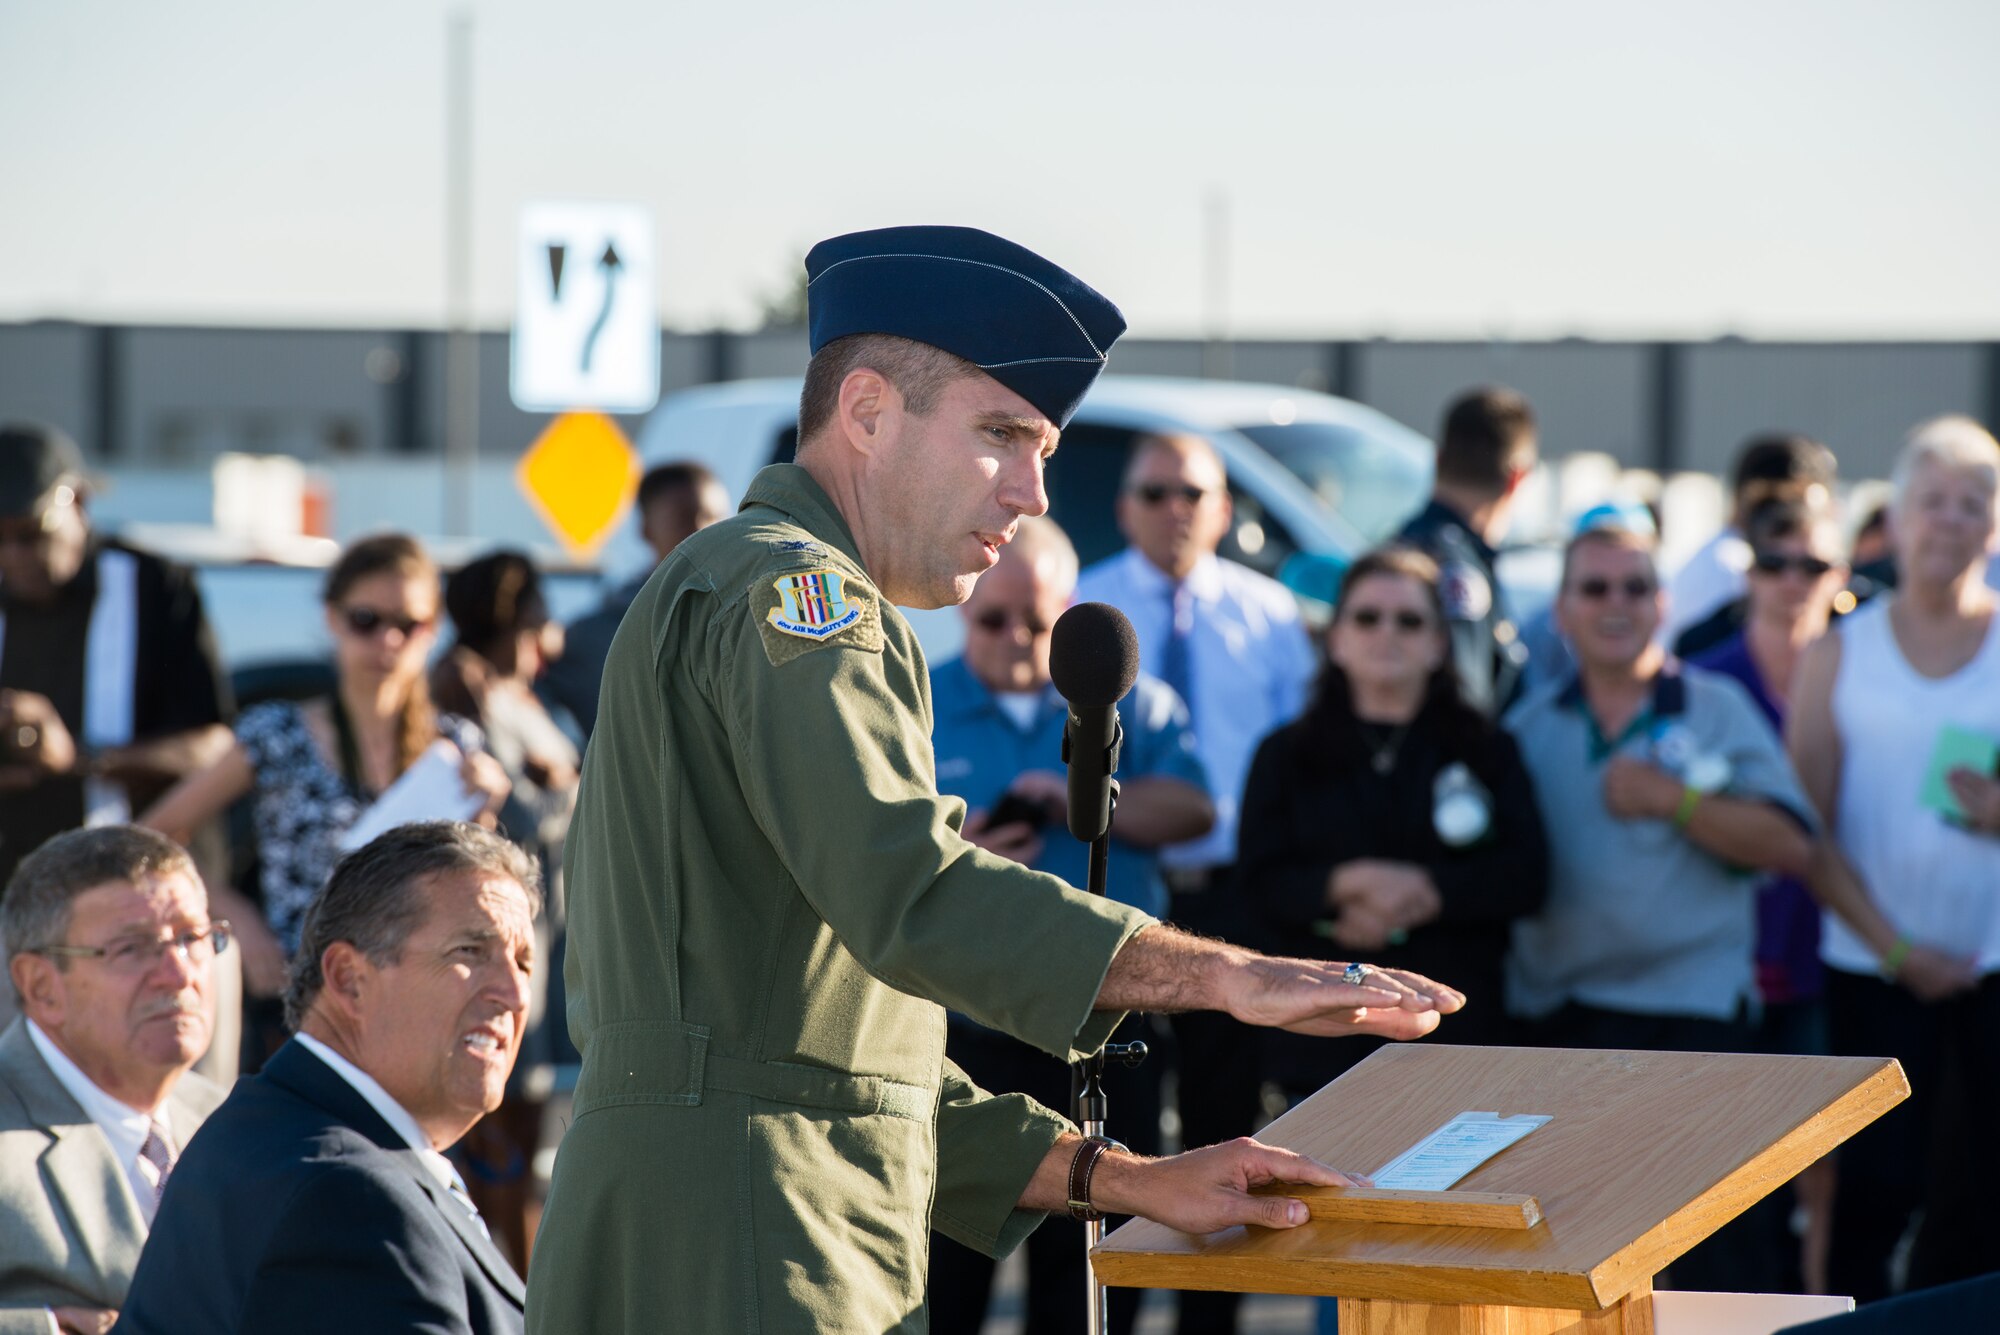 U.S. Air Force Col. John Klein, 60th Air Mobility Wing commander, at Travis Air Force Base, Calif., provides remarks during the Peabody Road reopening ceremony in Fairfield, Calif., Aug. 4, 2016. The road was closed for 14-months and finished ten days ahead of schedule. Peabody Road is a major thoroughfare that connects the cities of Vacaville and Fairfield, more than 20,000 vehicles per day use the road and it is also a major artery into Travis Air Force Base for more than 14,000 employees. The construction of the Peabody Road overpass is part of the new Fairfield-Vacaville train station project along the Capitol Corridor. (U.S. Air Force photo by Louis Briscese) 